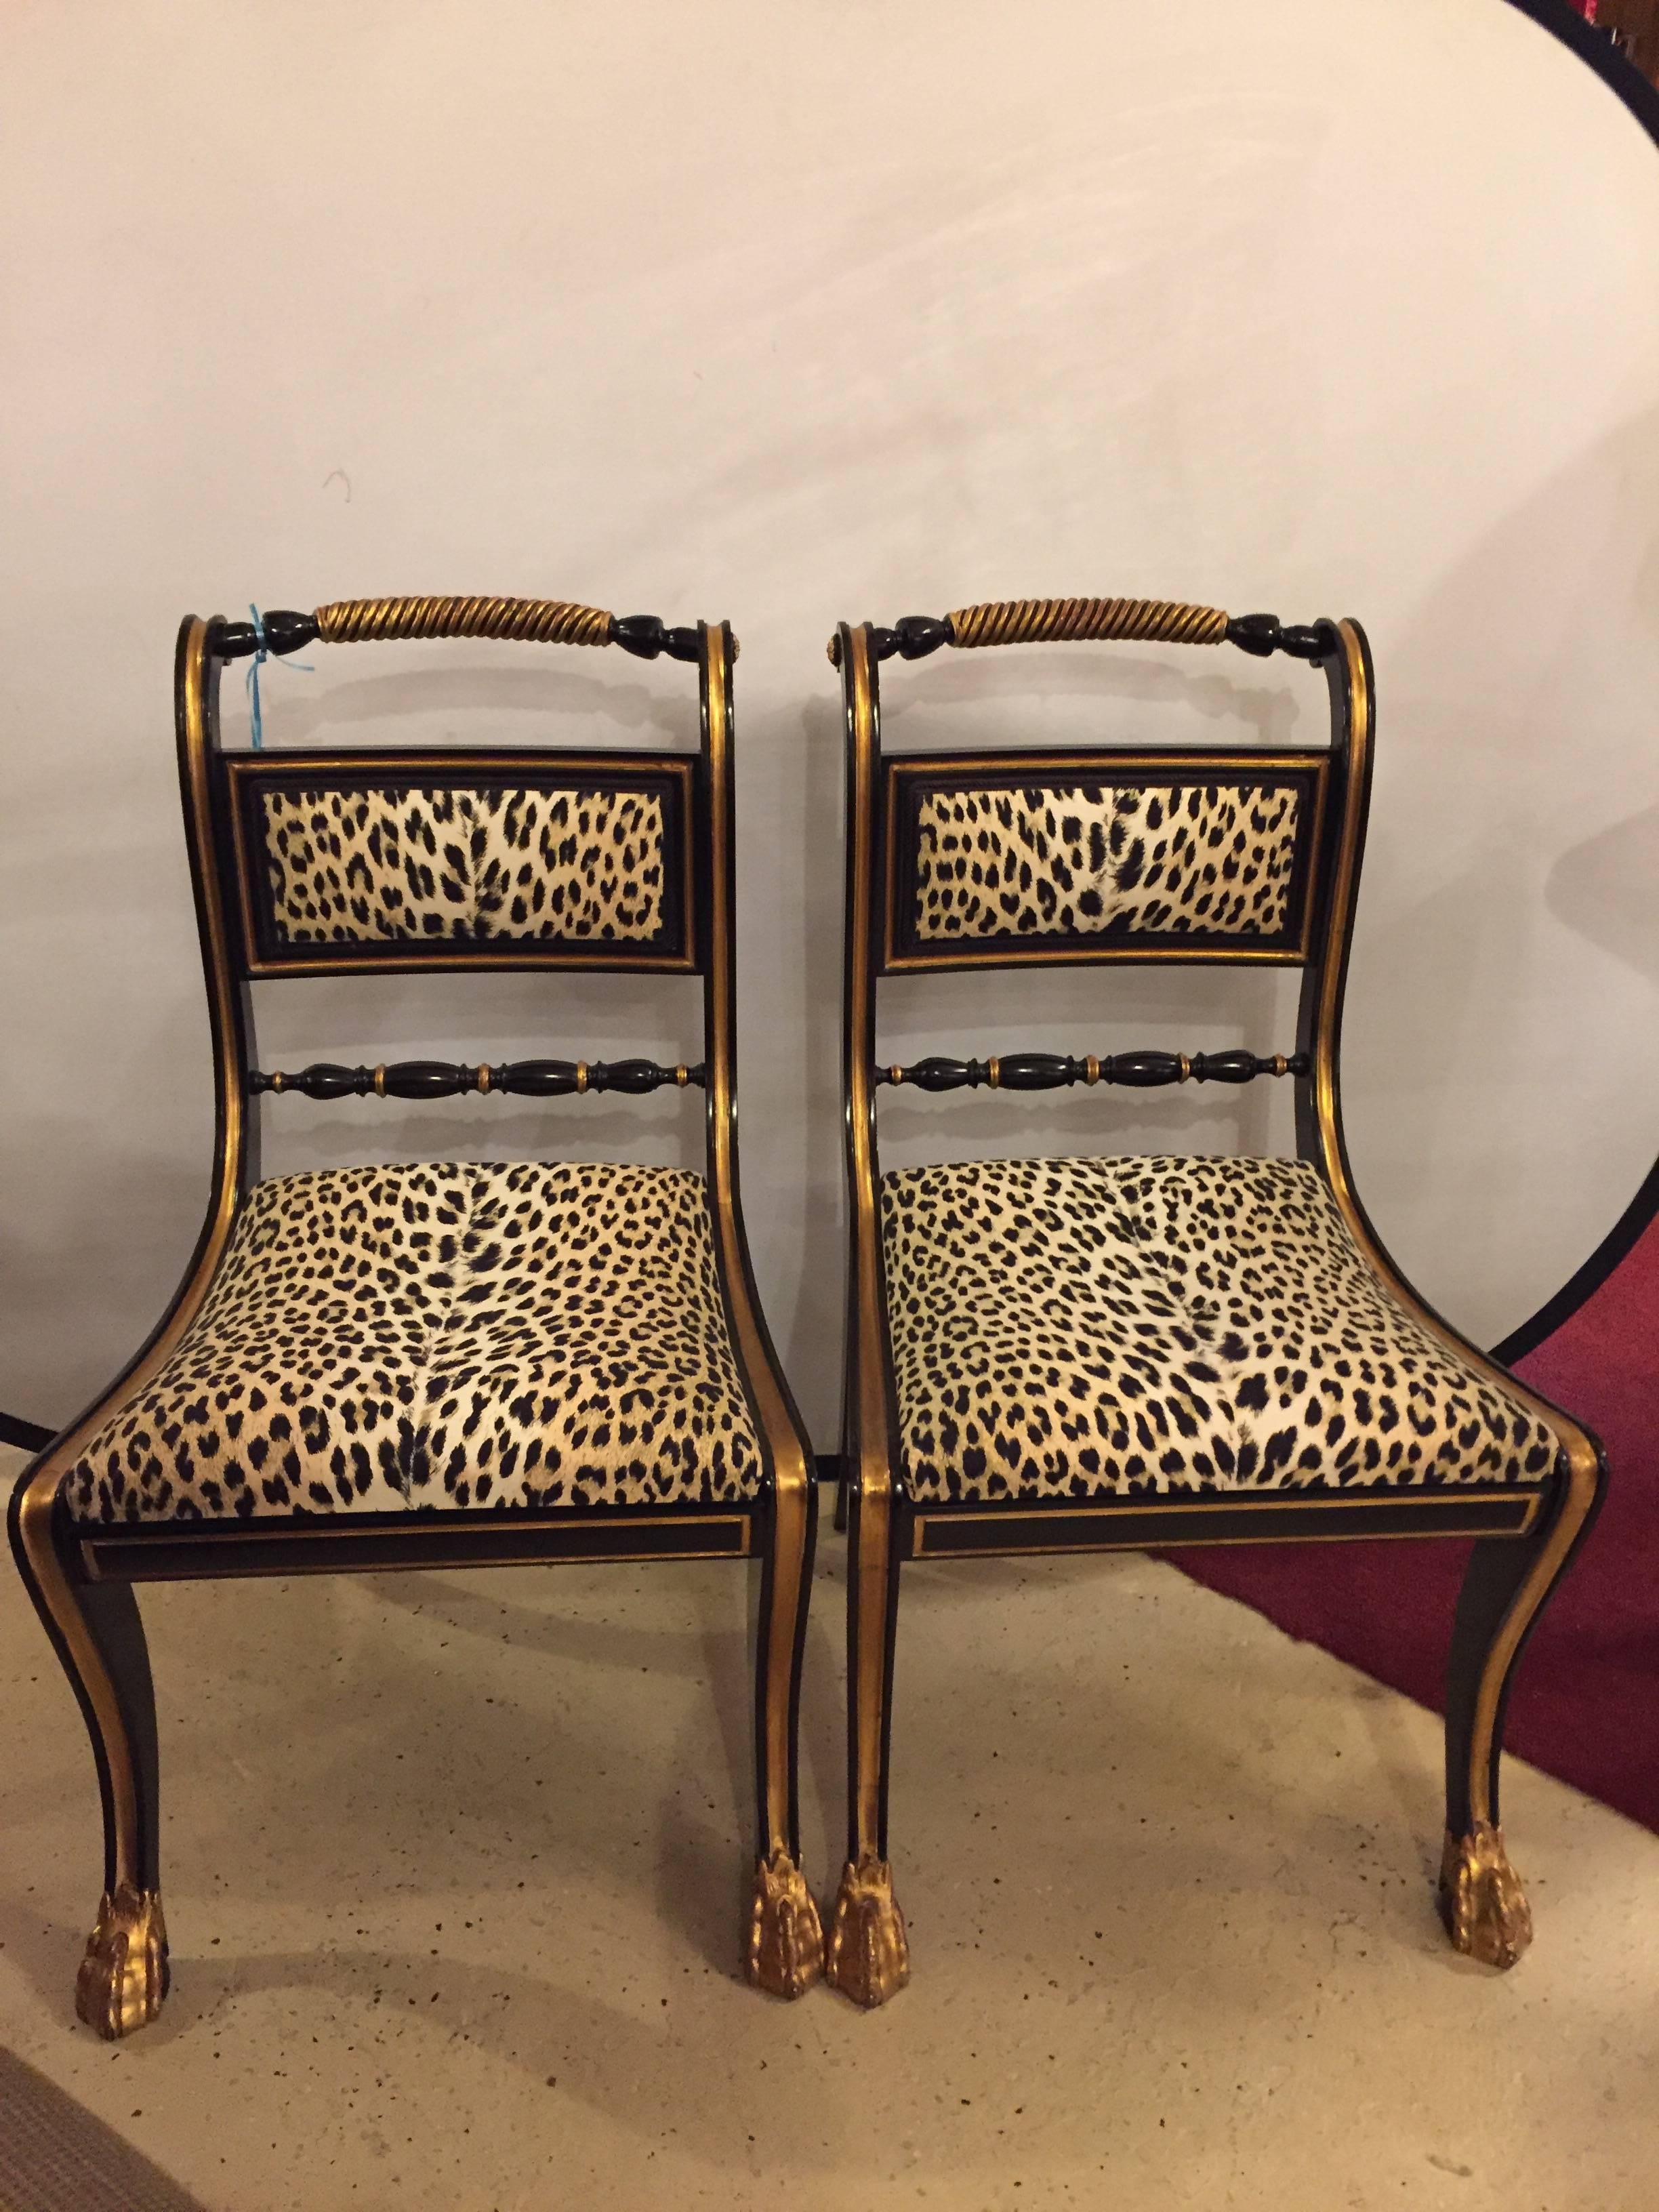 A fine  Set of 10 Ebonized and Gilt Gold Side Chairs. Two are for sale in this listing, all eight available. Each with a gilt claw foot leading to a curved leg with gilt design flowing onto an apron of matching form. The leg continuing to the seat